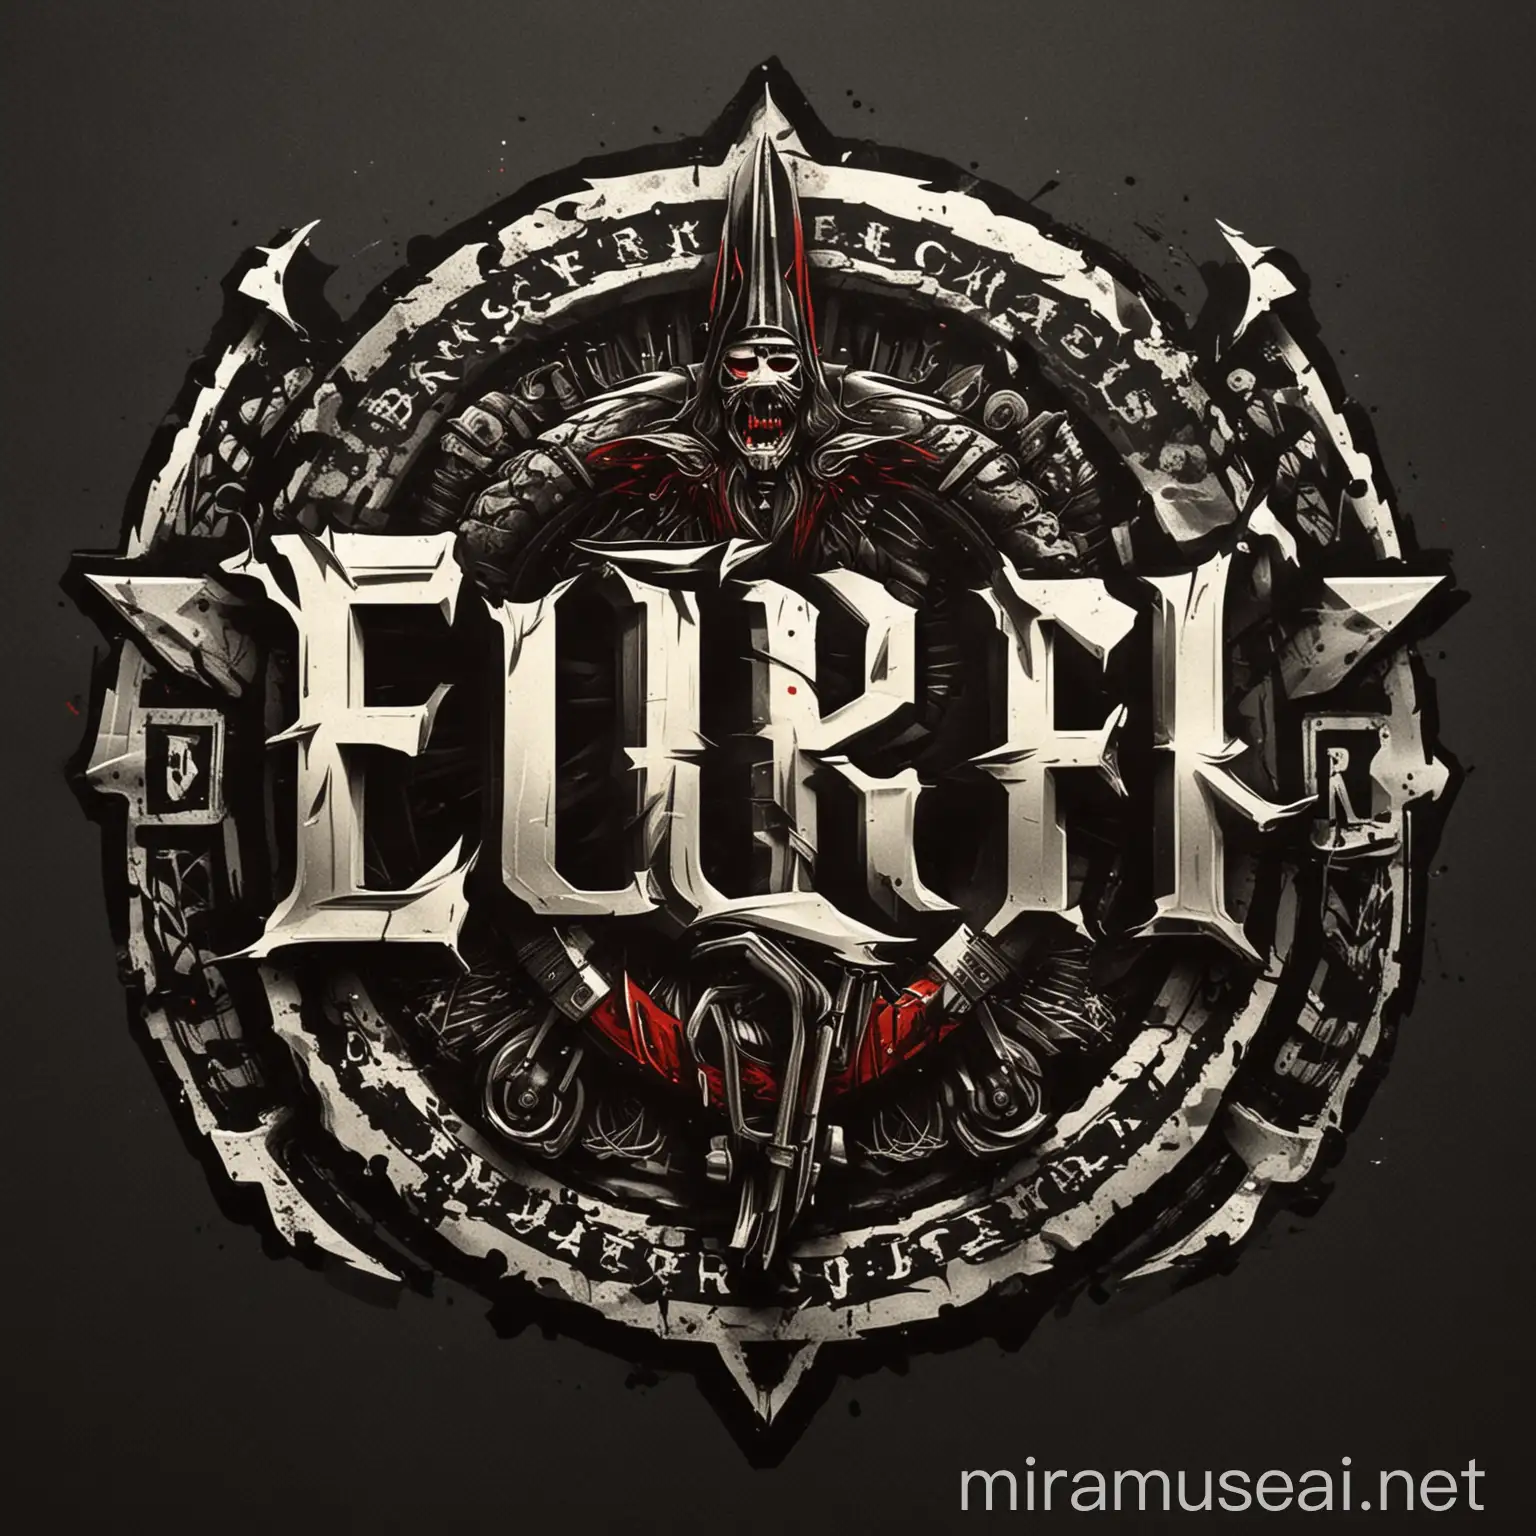 Motorcycle Club Logo Design Euri R Emblem with Gear and Speed Theme